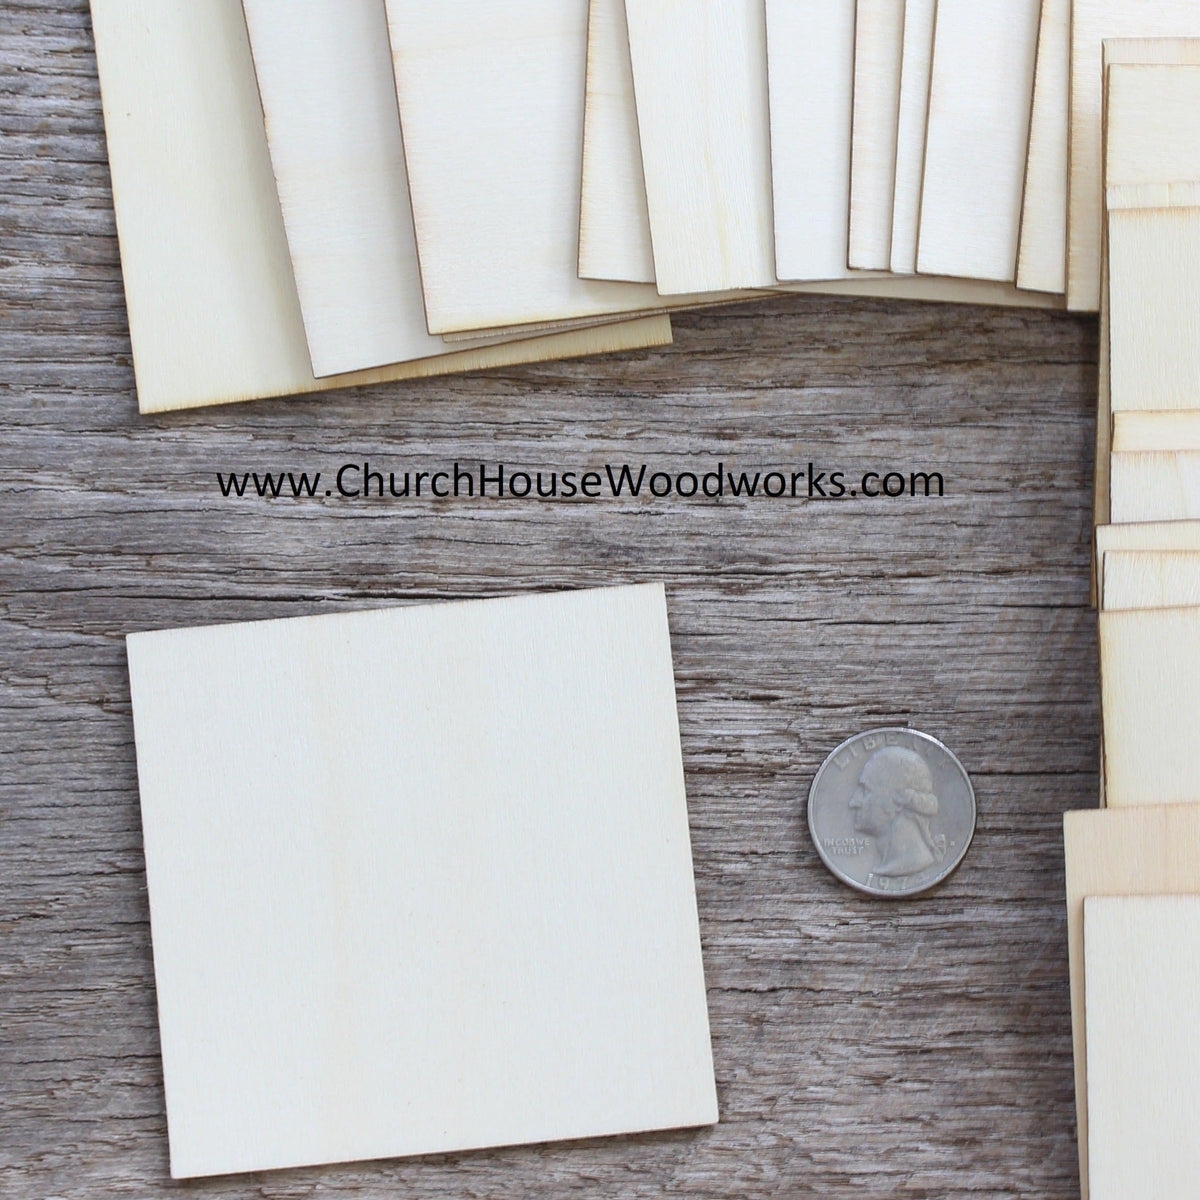 25 Small Wood Square 2 inch – Church House Woodworks